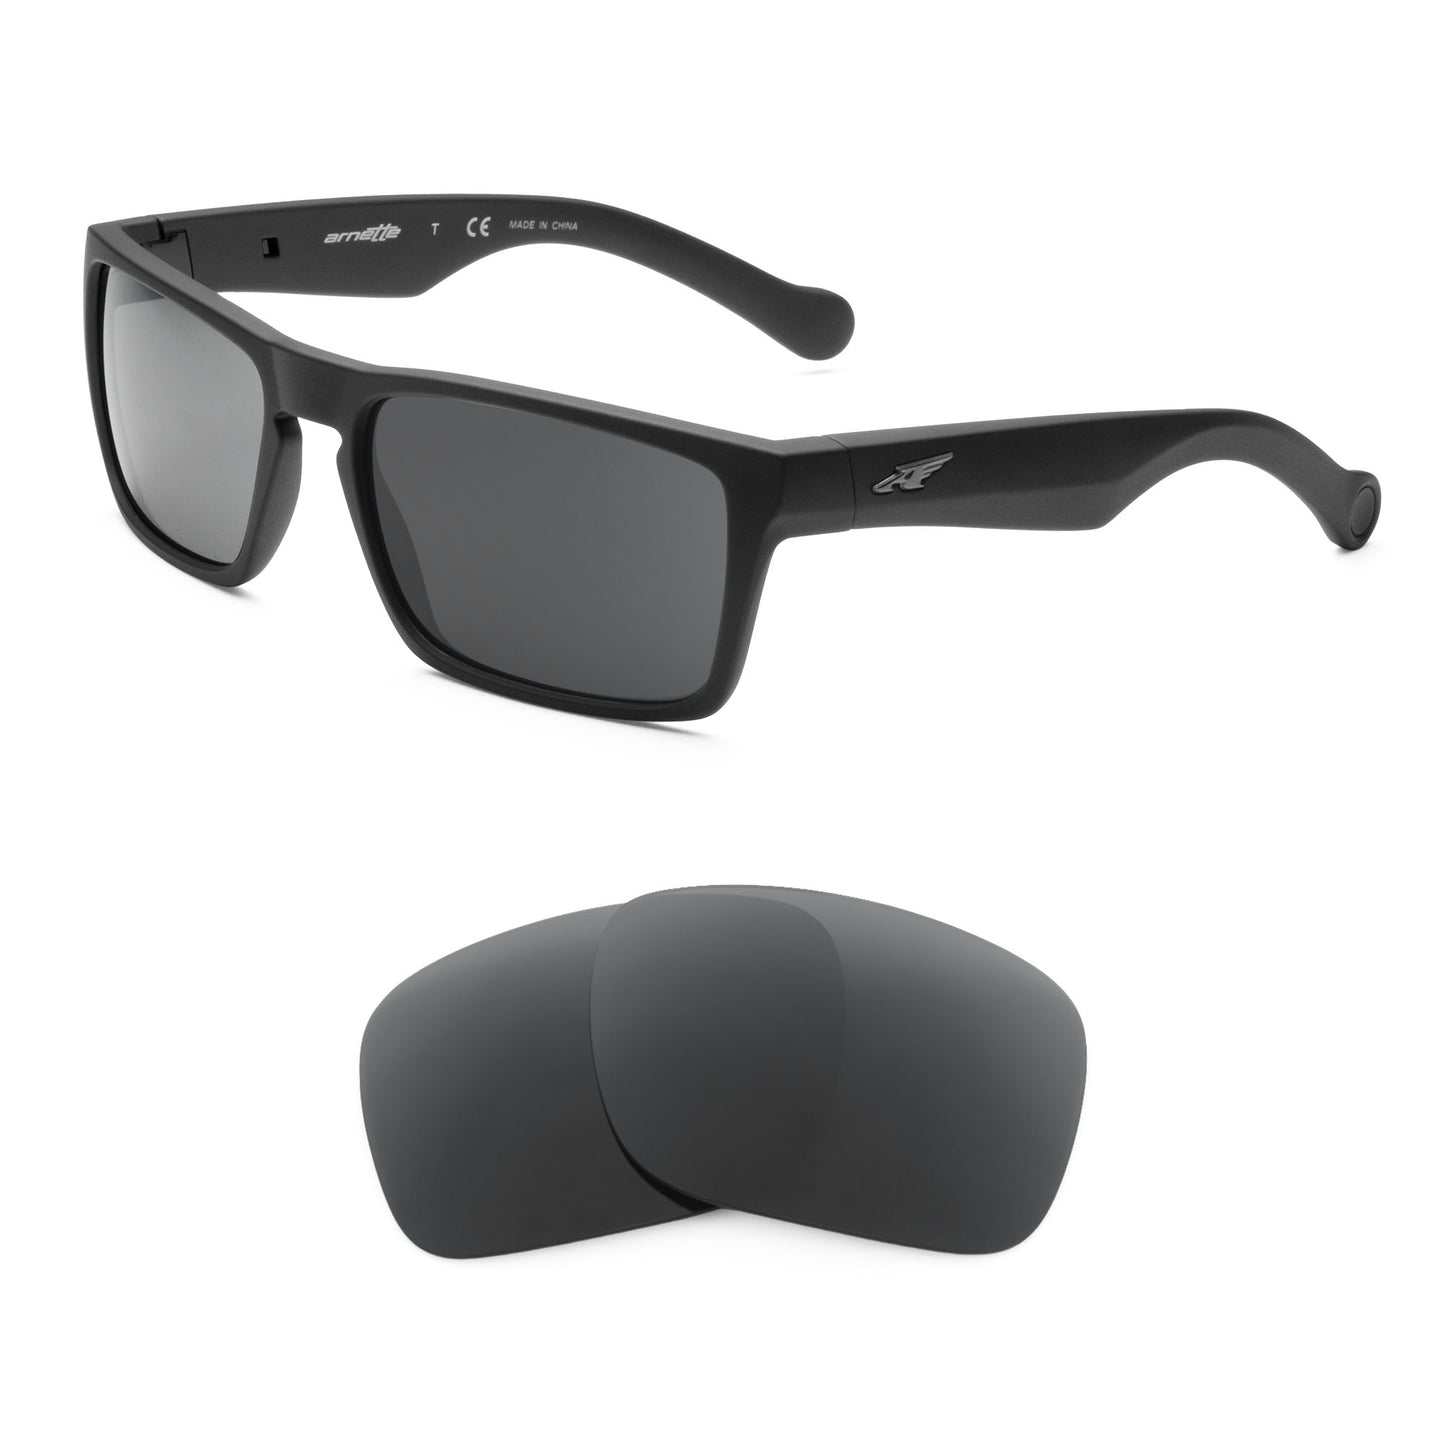 Arnette Specialist AN4204 sunglasses with replacement lenses